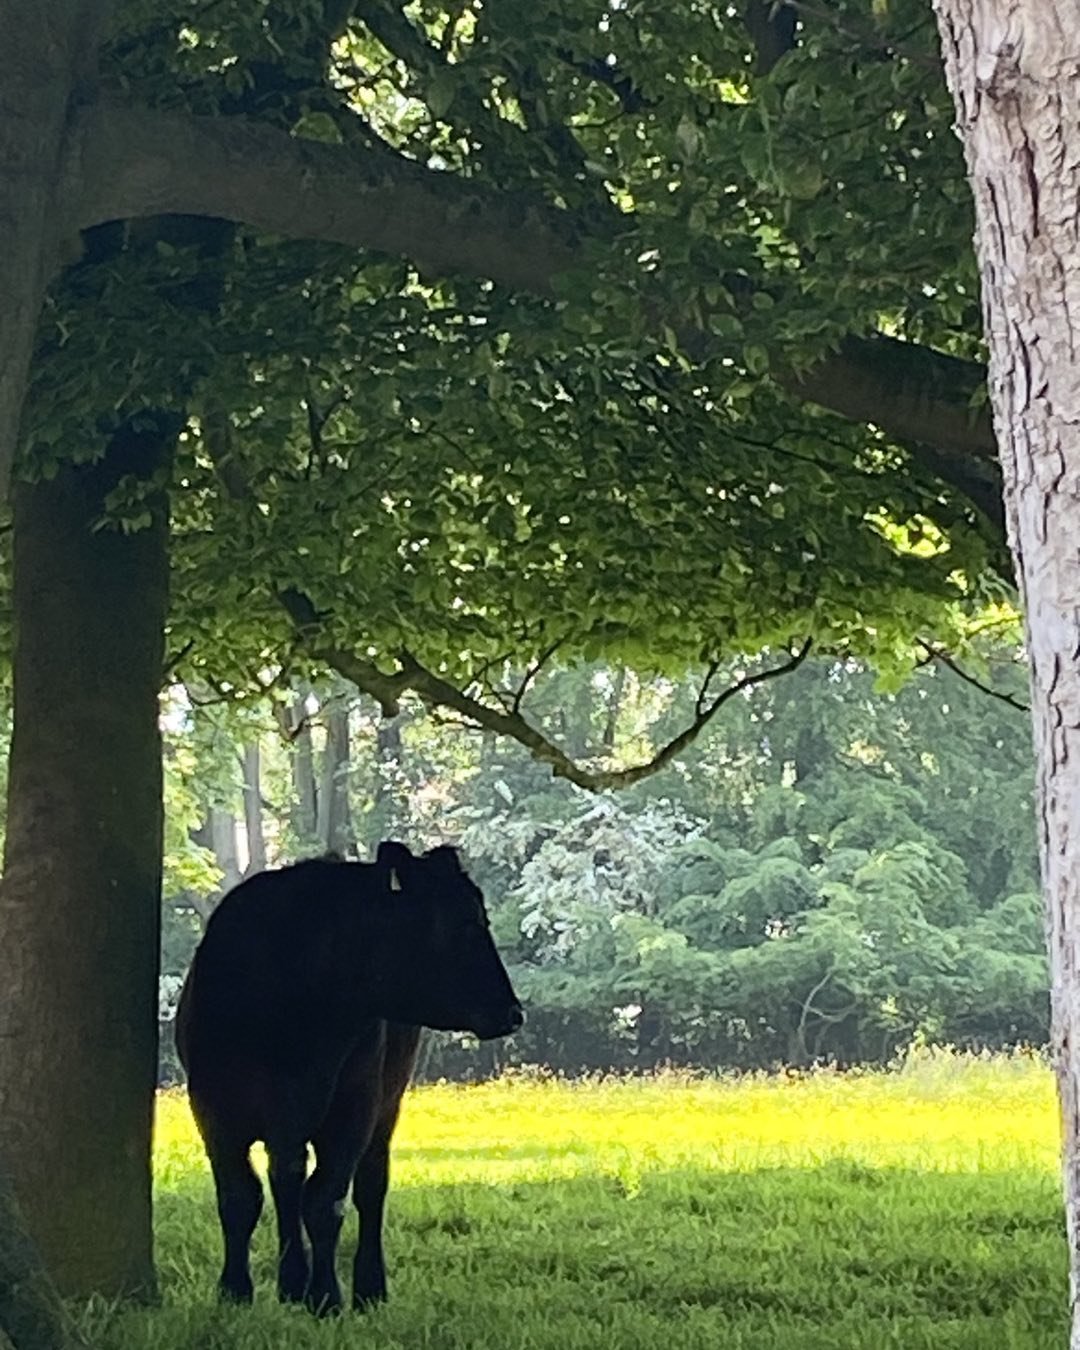 The cows are back
In the field
Chewing our windows etc

Since living surrounded by cows for the last thirteen years. Quite literally licking and chewing our back windows, I have come to know them better. When they leave at the end of the summer they 